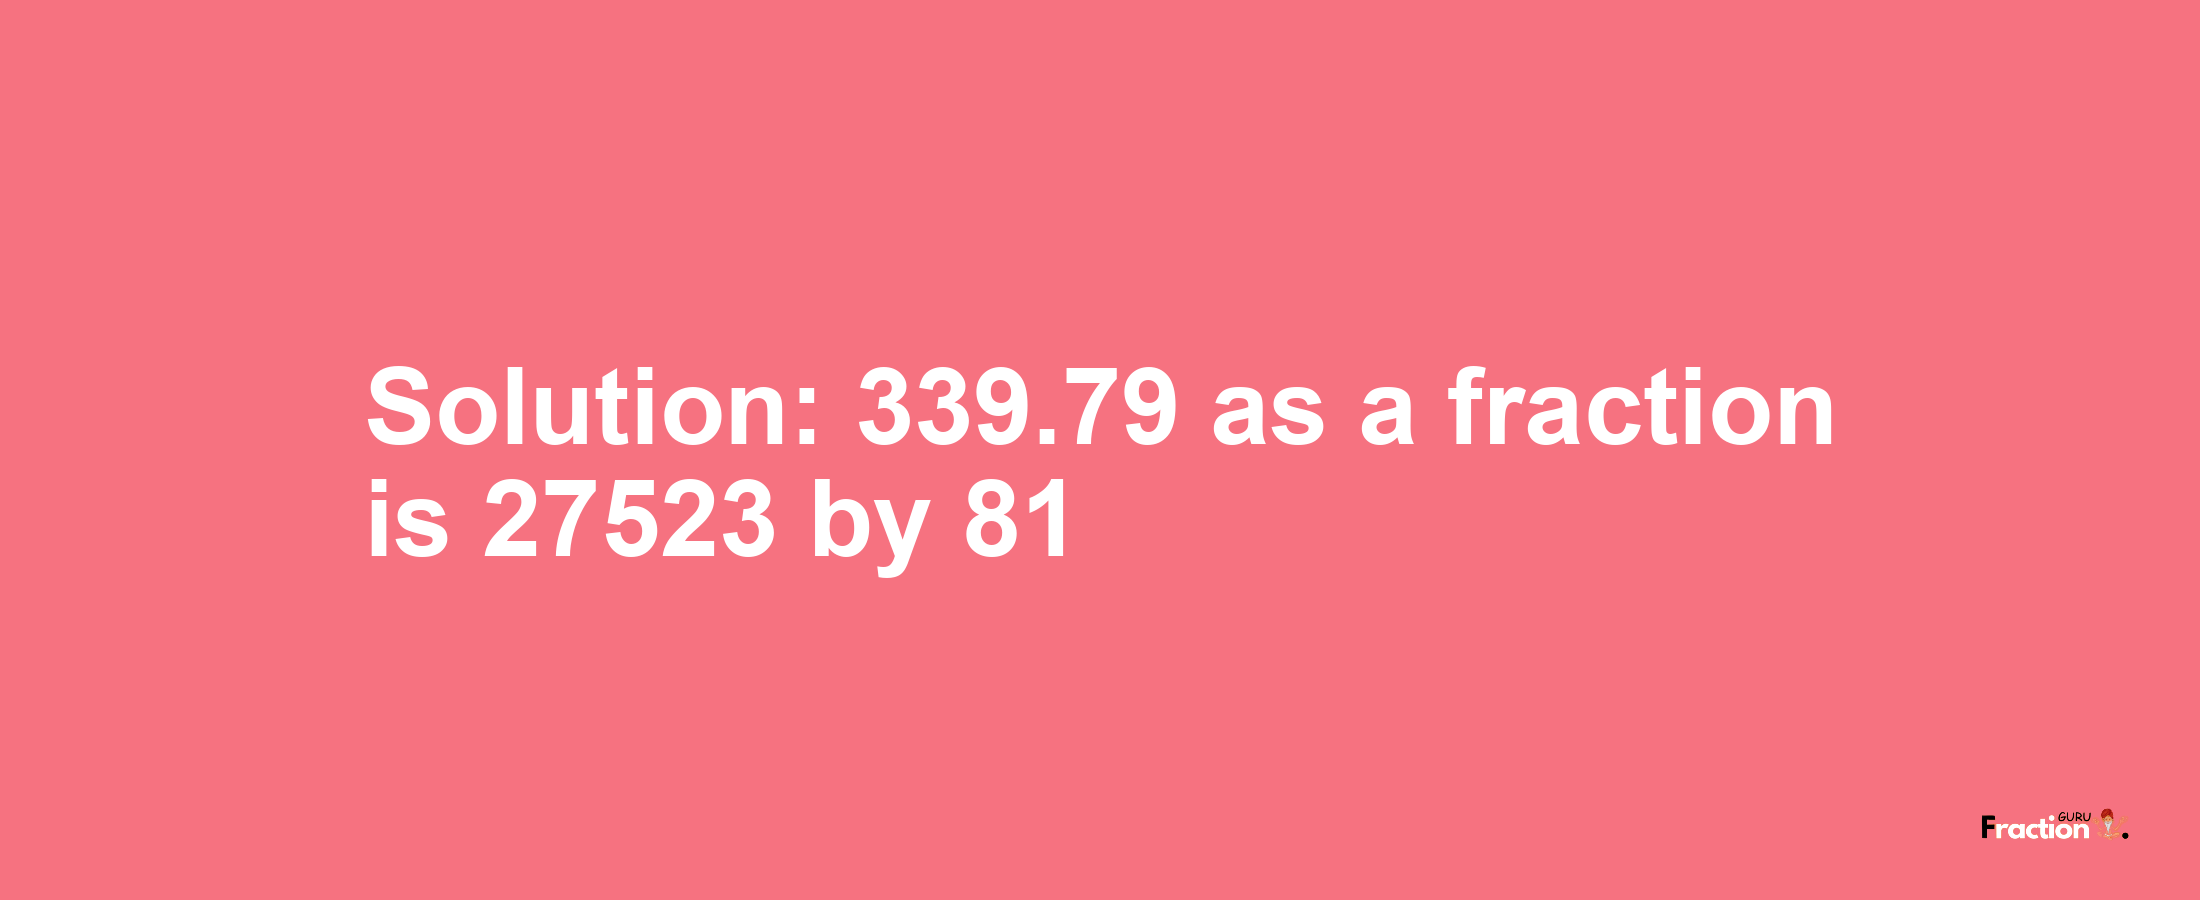 Solution:339.79 as a fraction is 27523/81